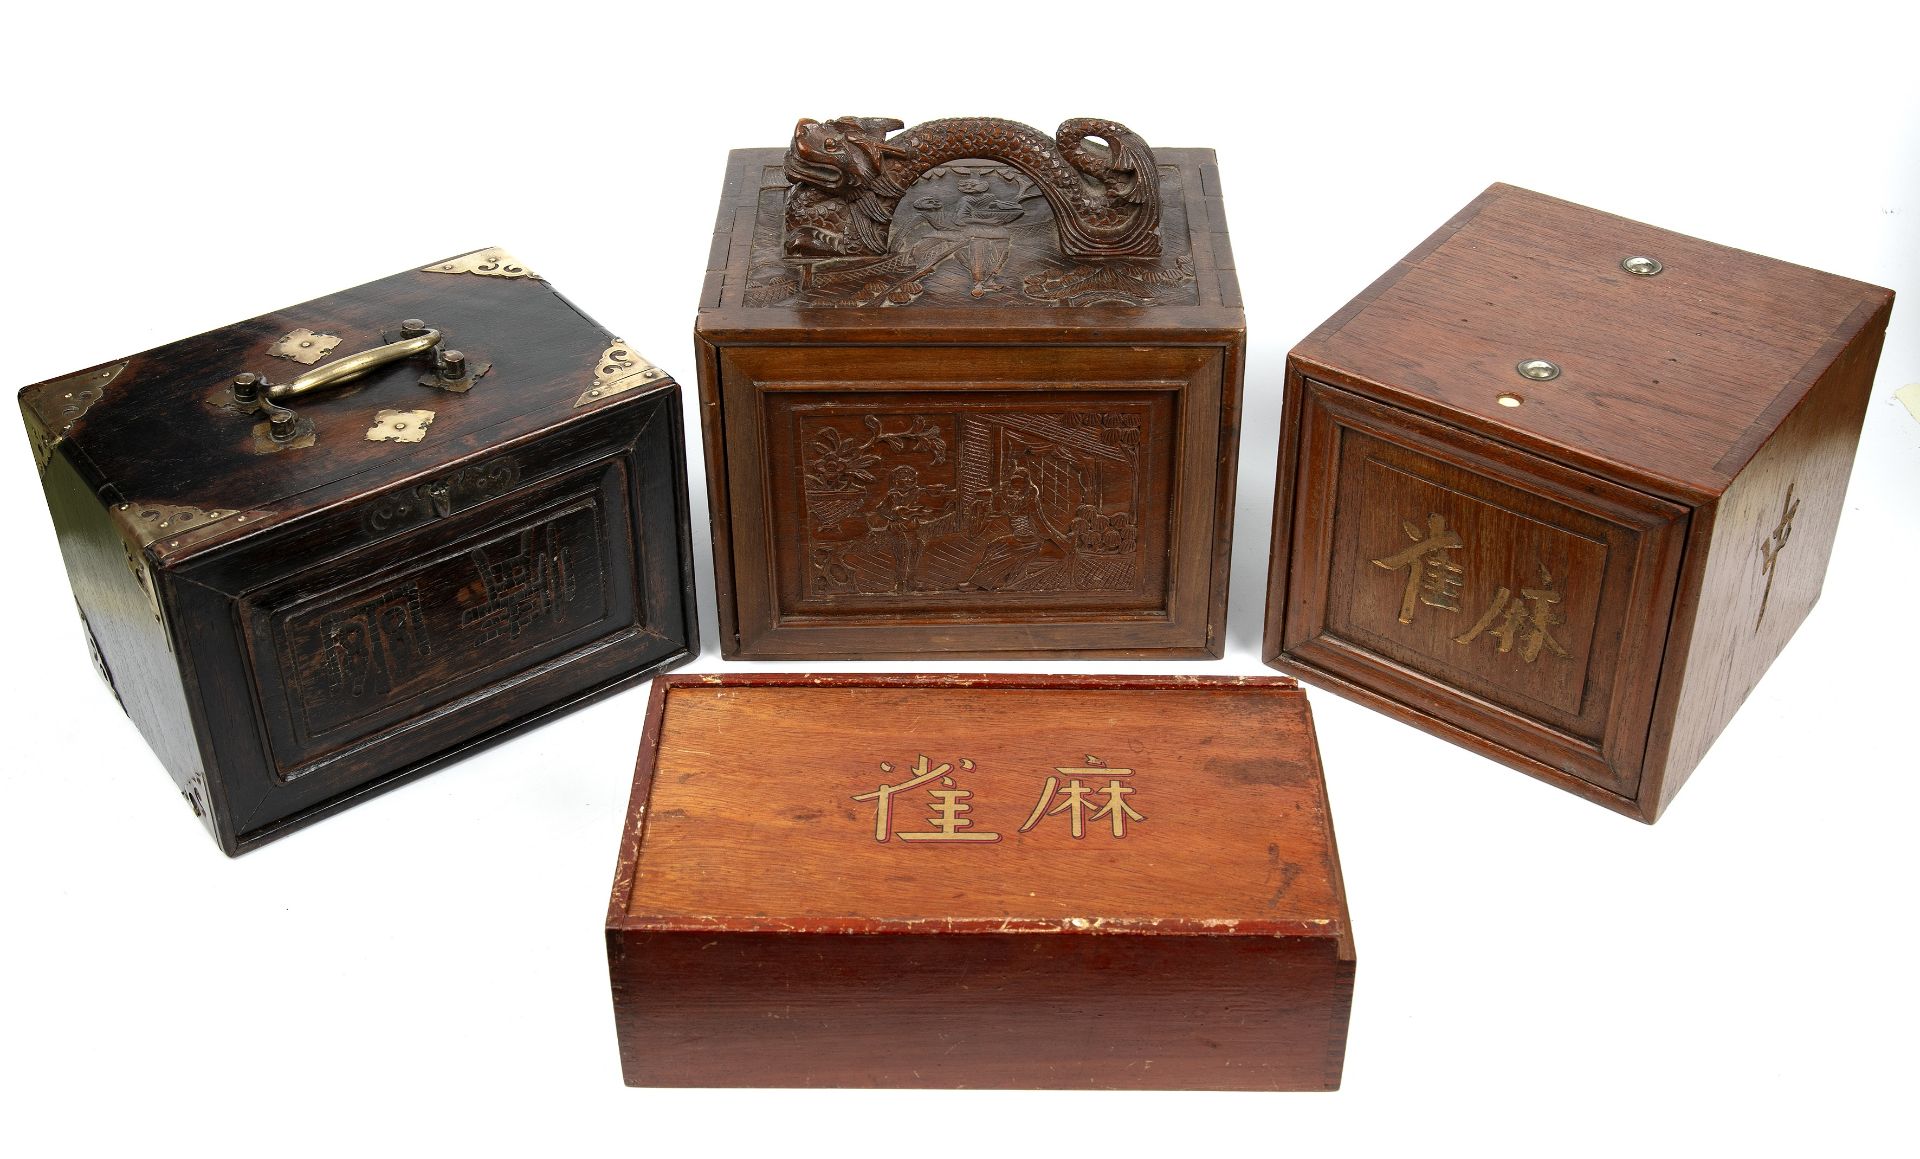 Four early 20th century majong sets, in Bone bamboo and resin. - Image 2 of 2